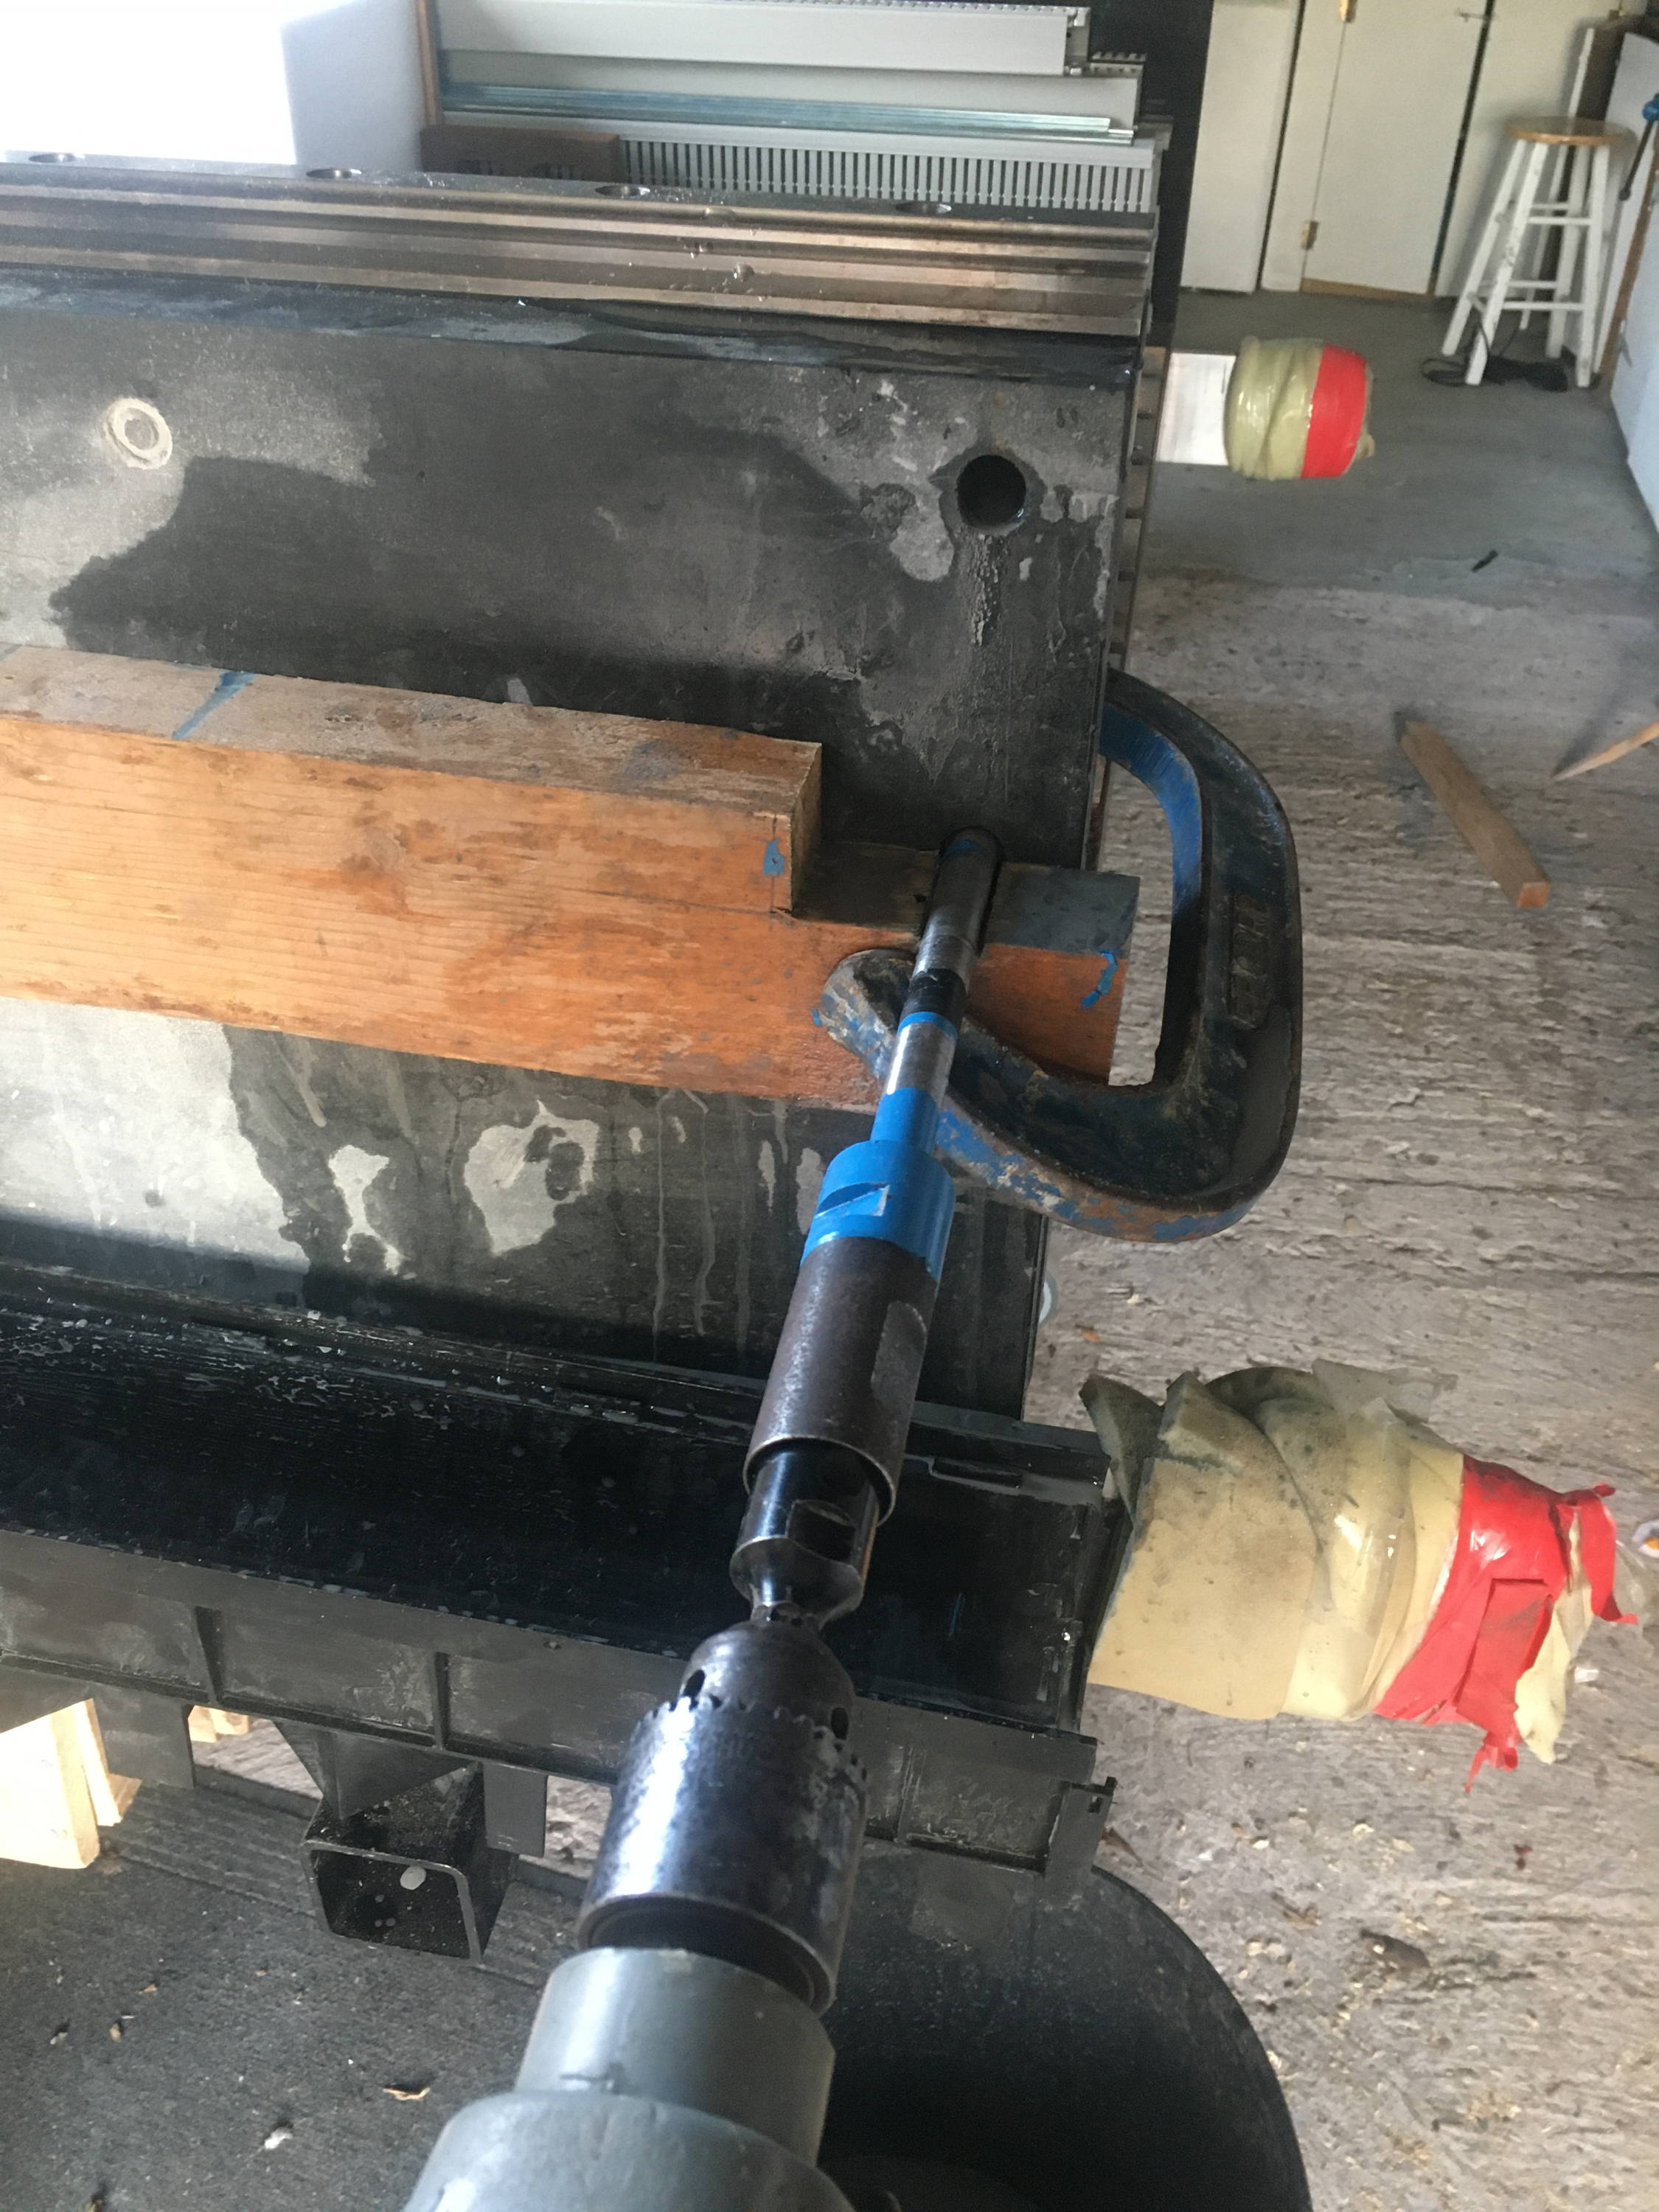 A simple wooden jig used to help align the core drill square and perpendicular to the granite.